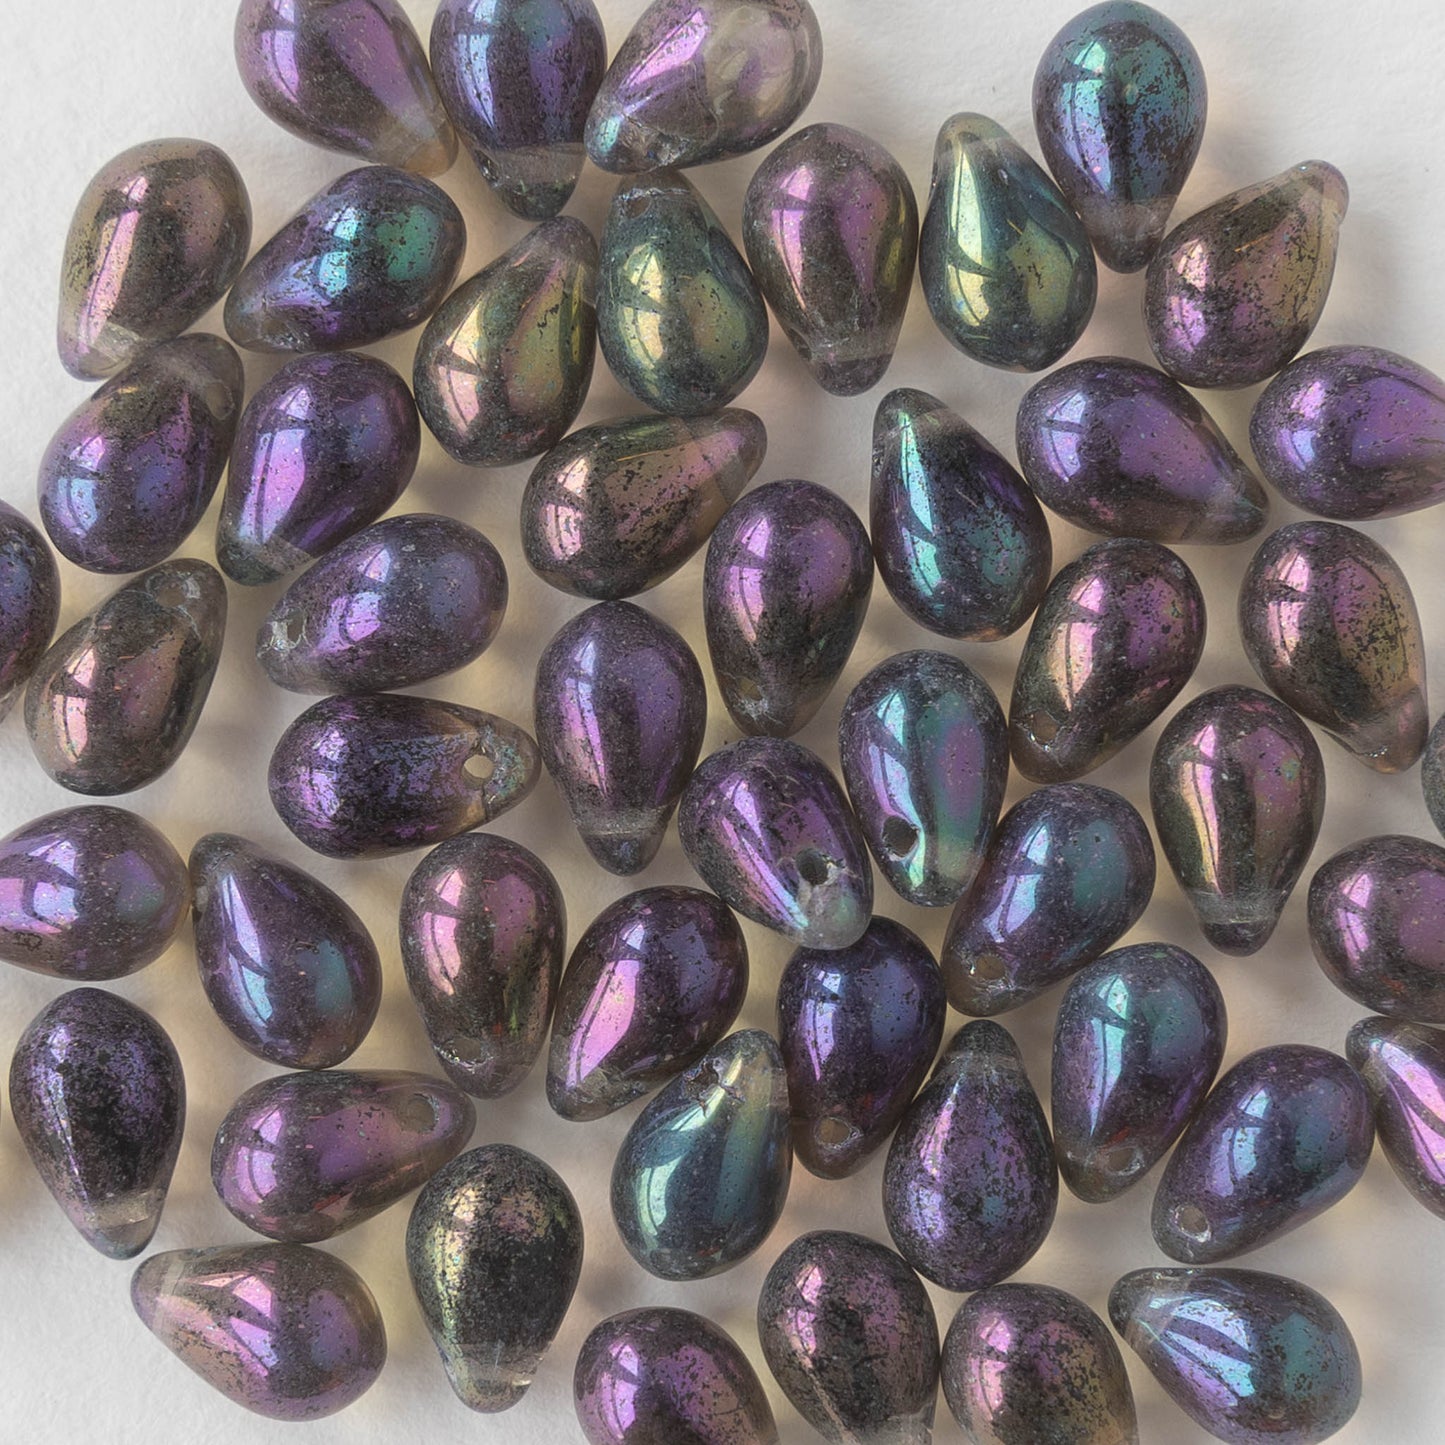 Load image into Gallery viewer, 6x9mm Glass Teardrop Beads - Light Sage Iris Luster - 50 Beads
